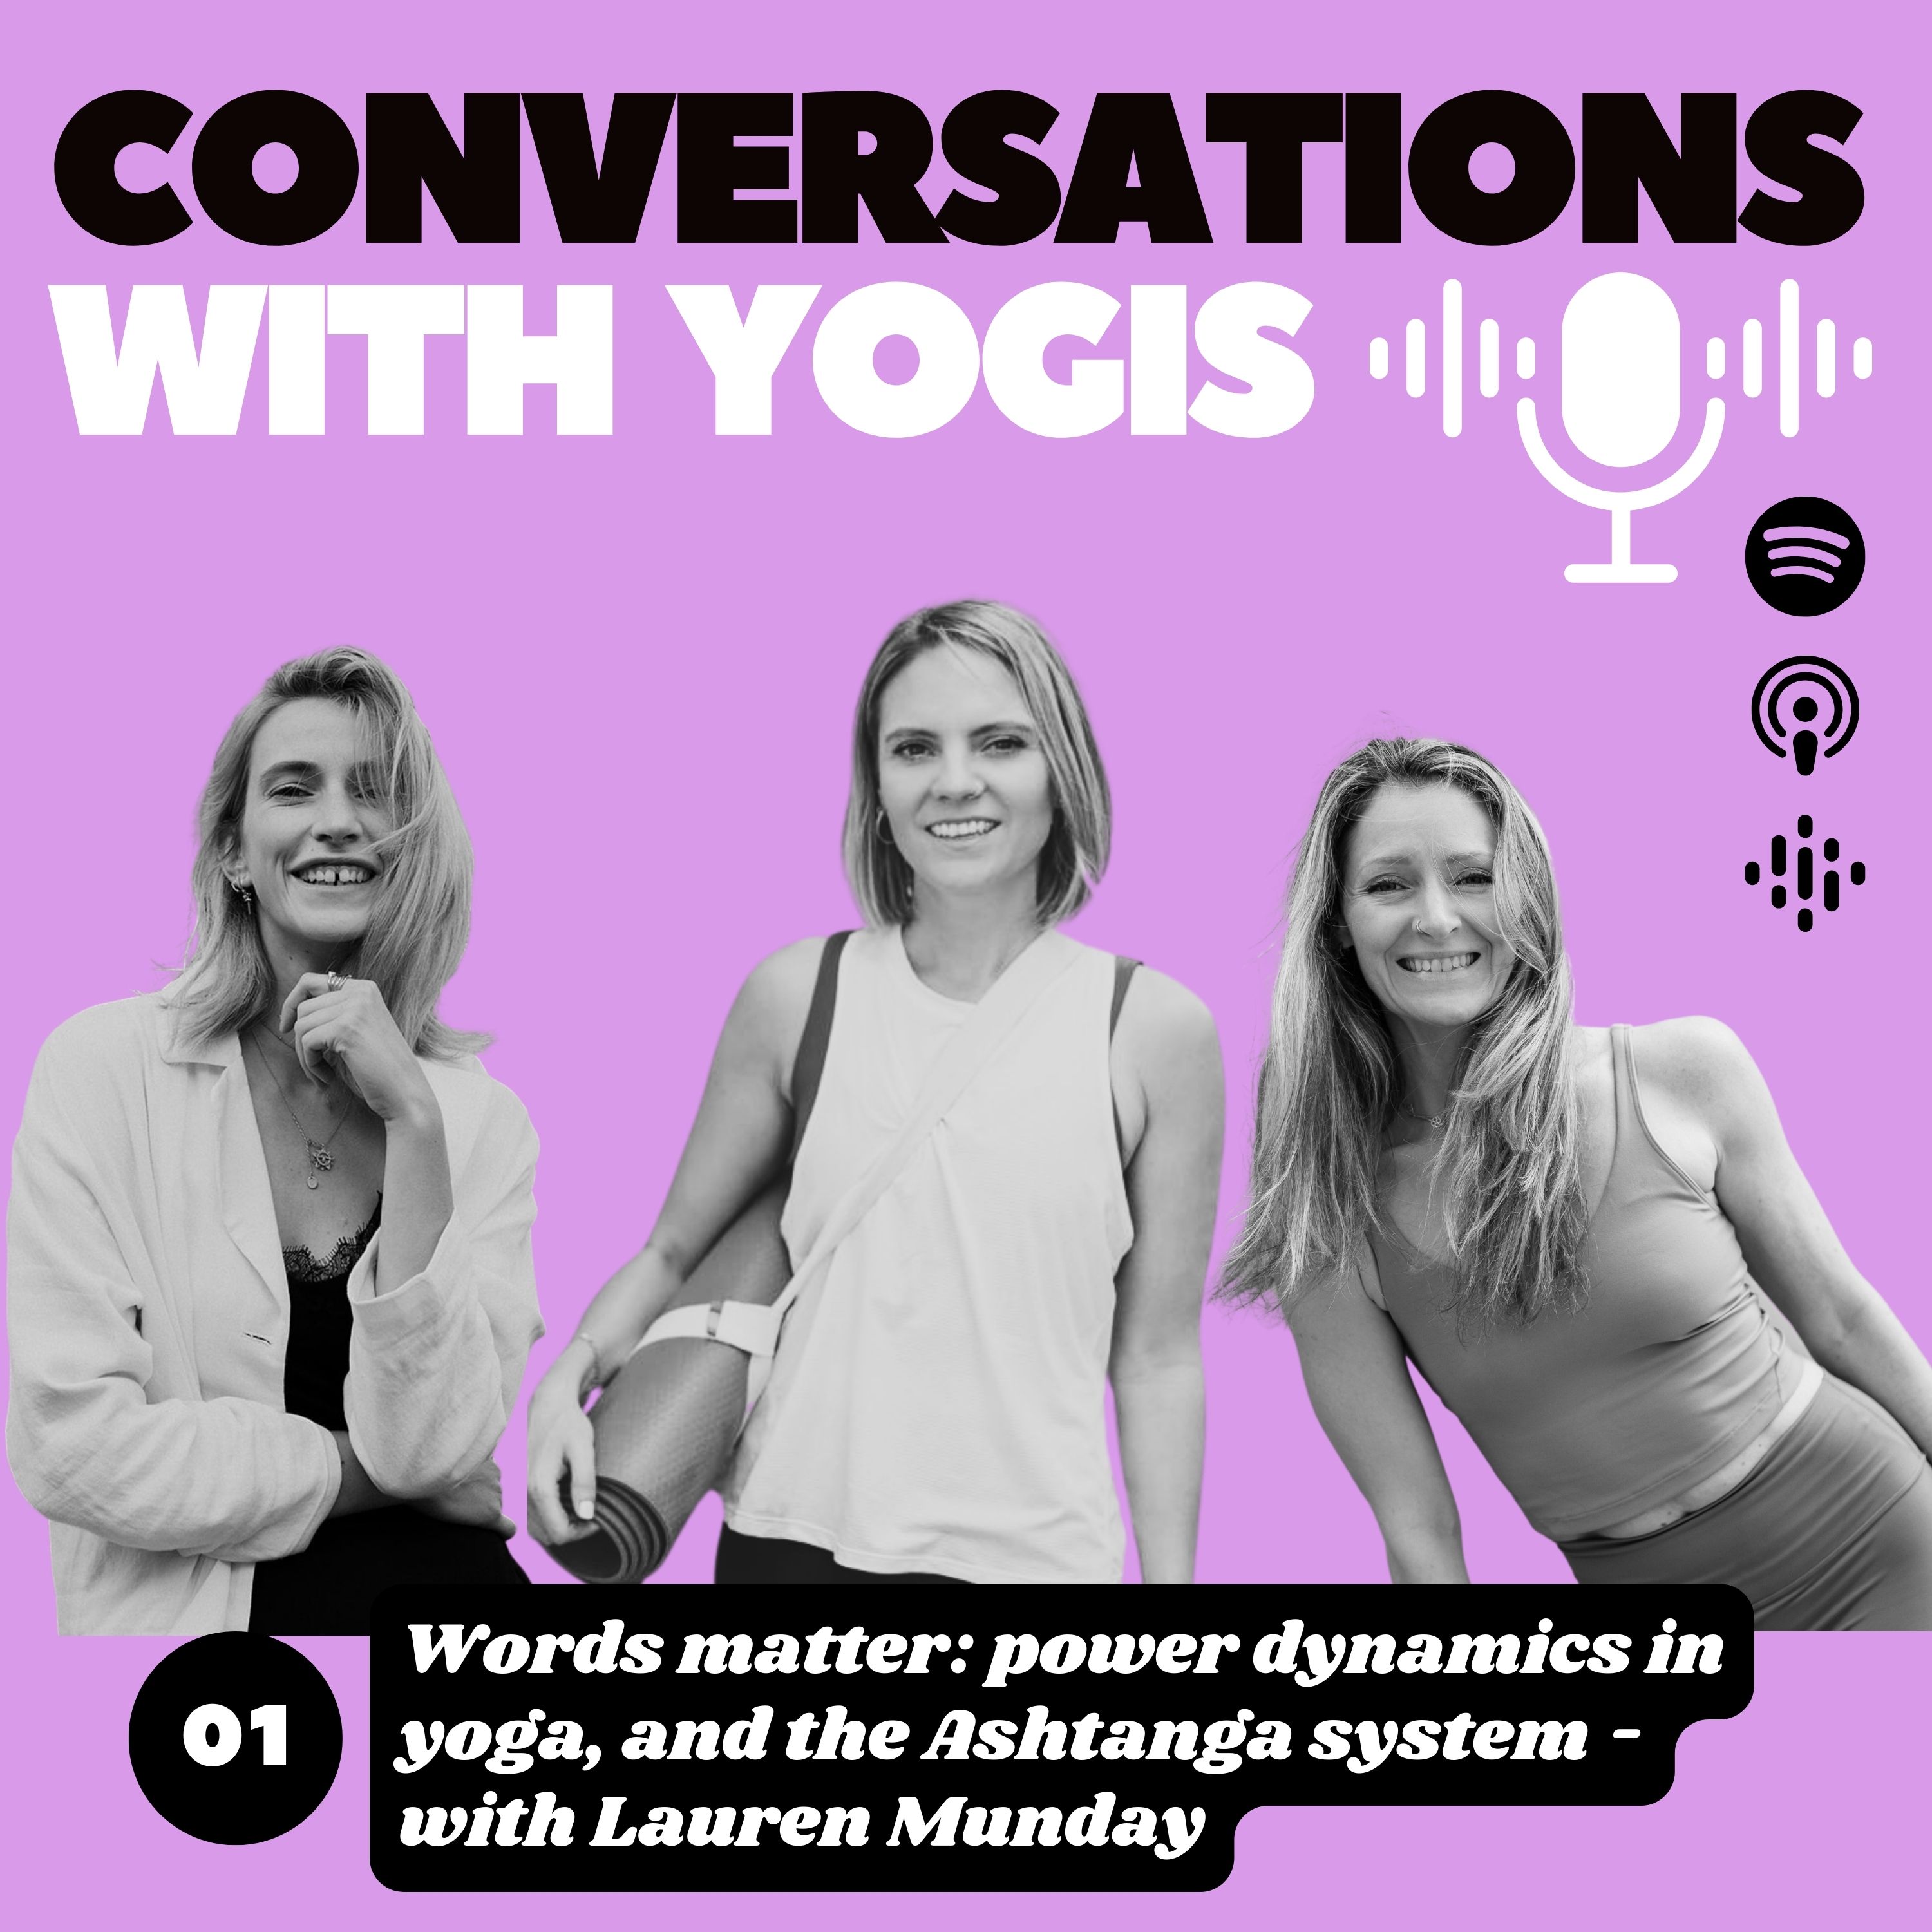 Conversations with Yogis Podcast